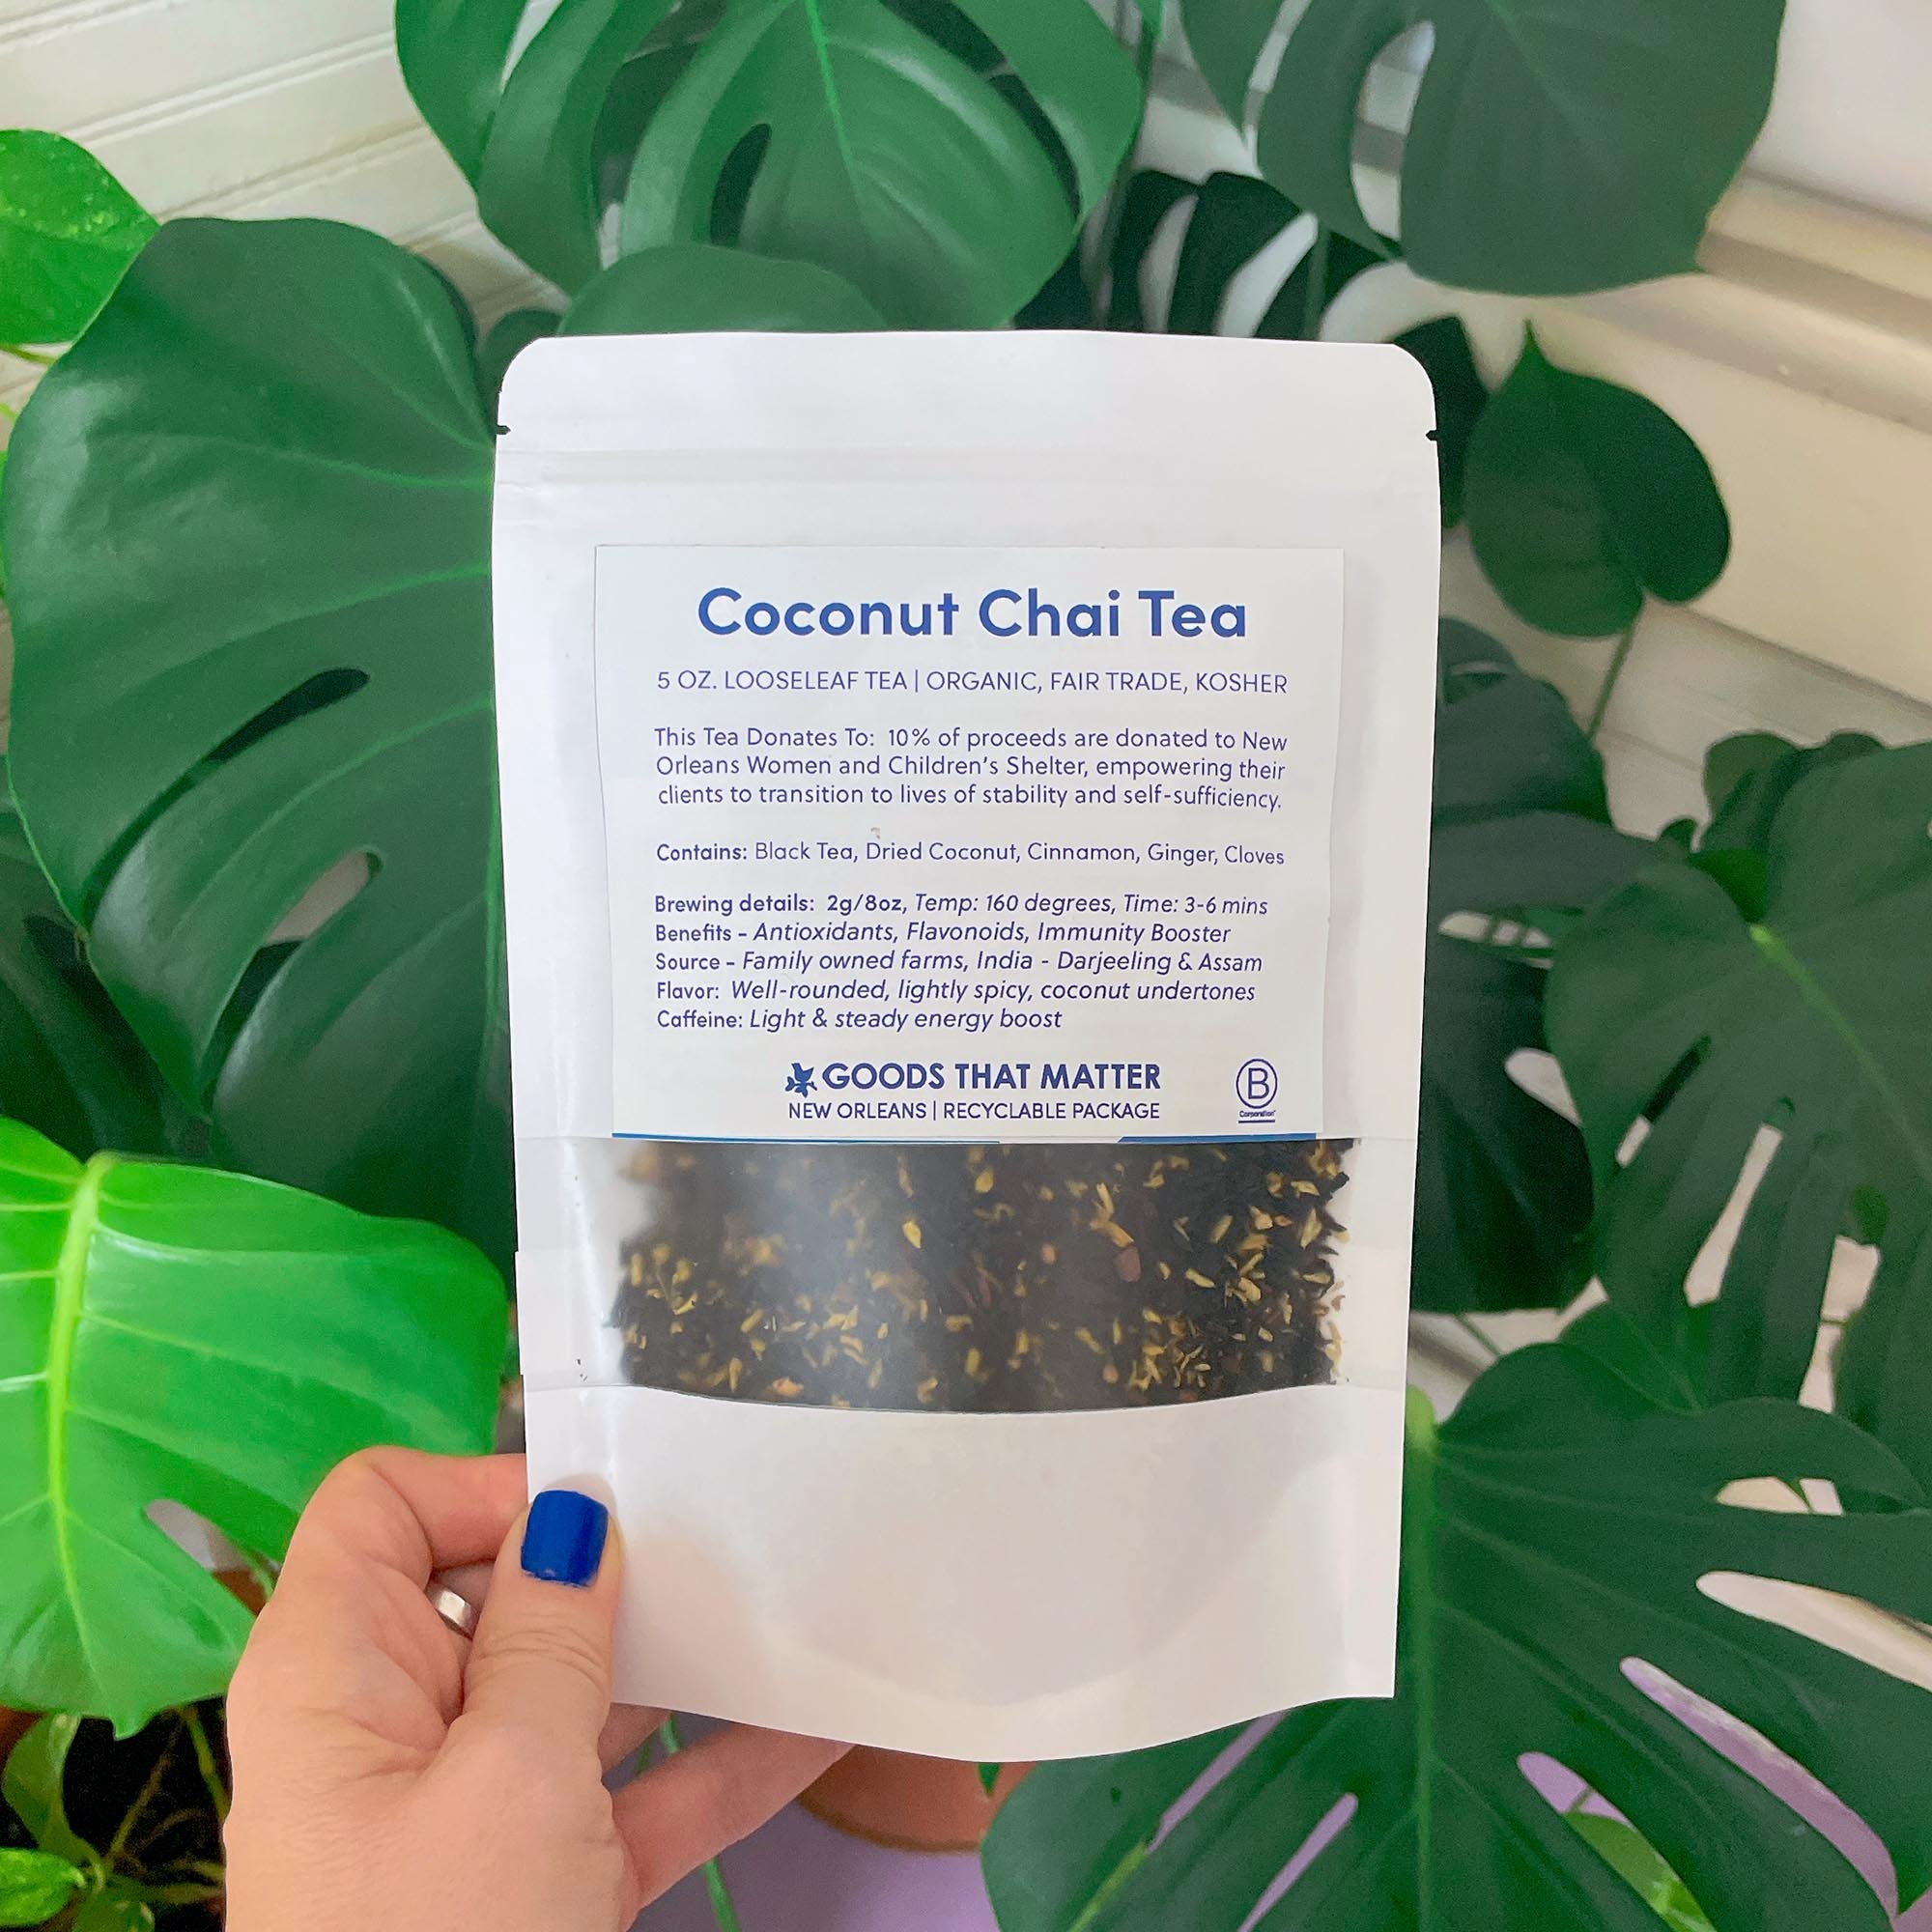 Coconut Chai Looseleaf Benevolent Tea - Gives to the New Orleans Women and Children’s Shelter